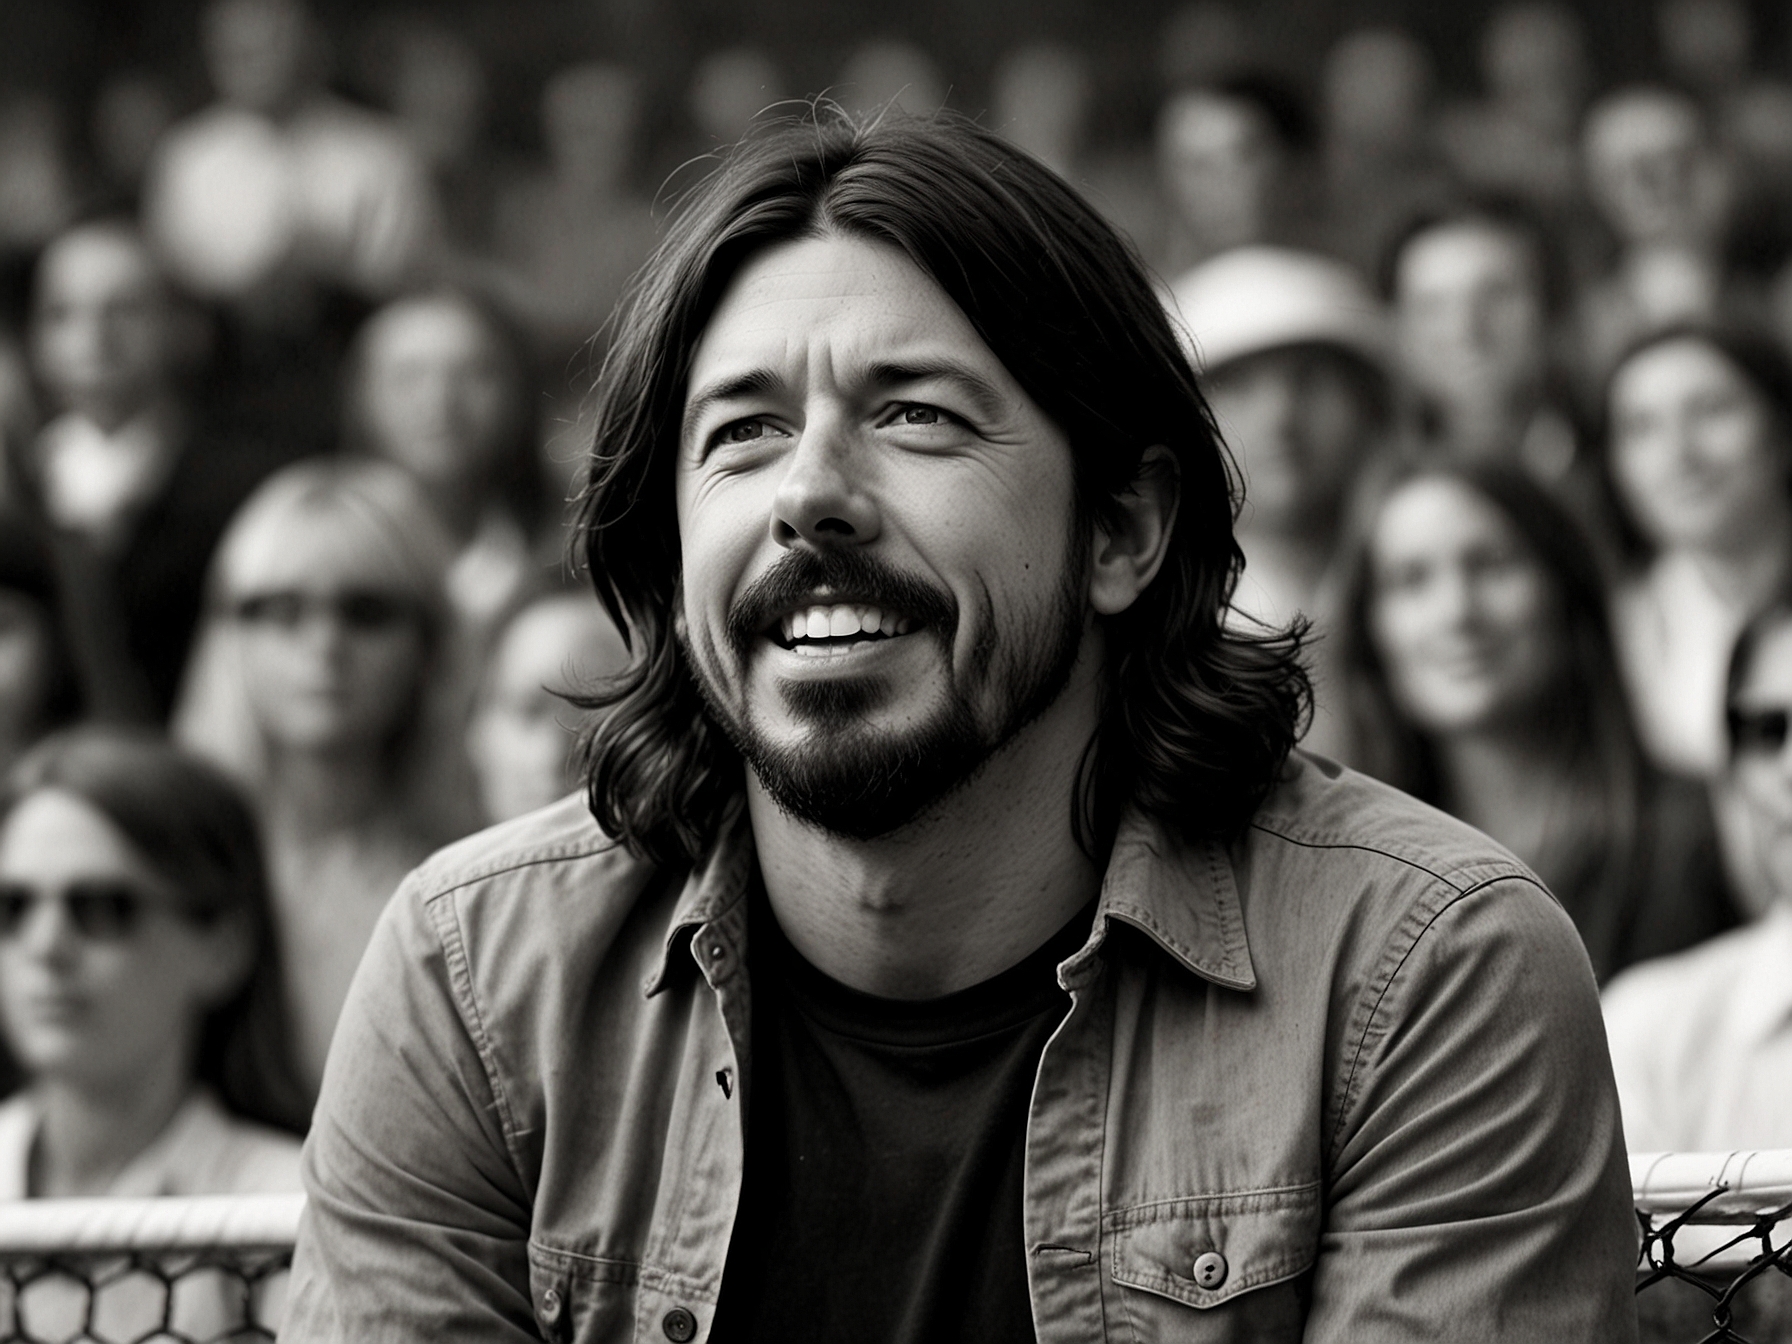 Grohl enthusiastically watches a match at Wimbledon, his expressions and occasional chats with spectators reflecting his genuine interest and insightful observations on the tournament.